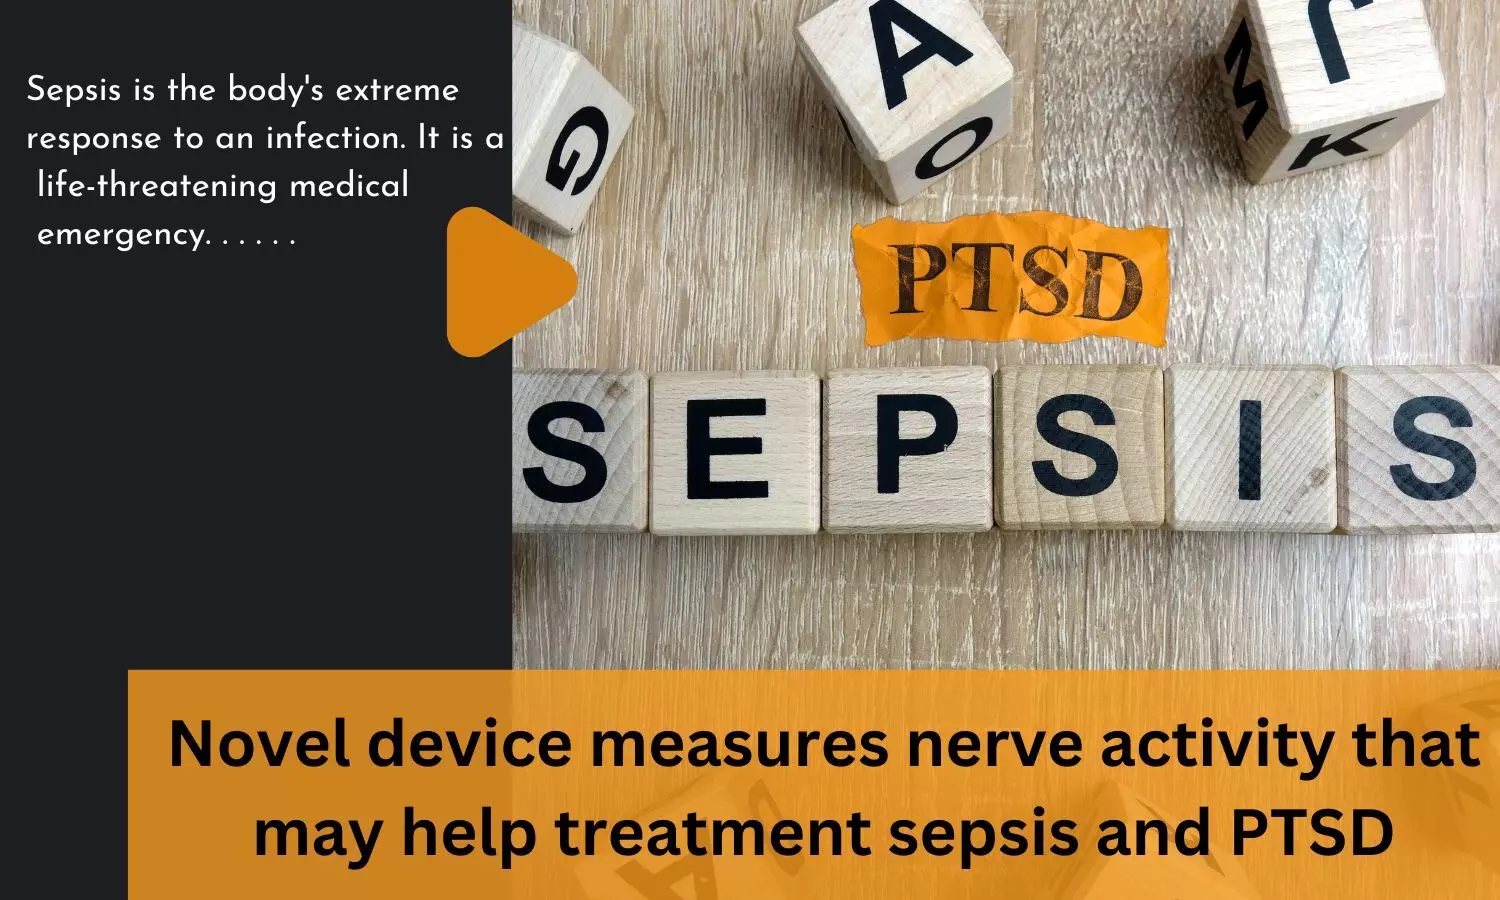 Novel device measures nerve activity that may help treatment sepsis and PTSD